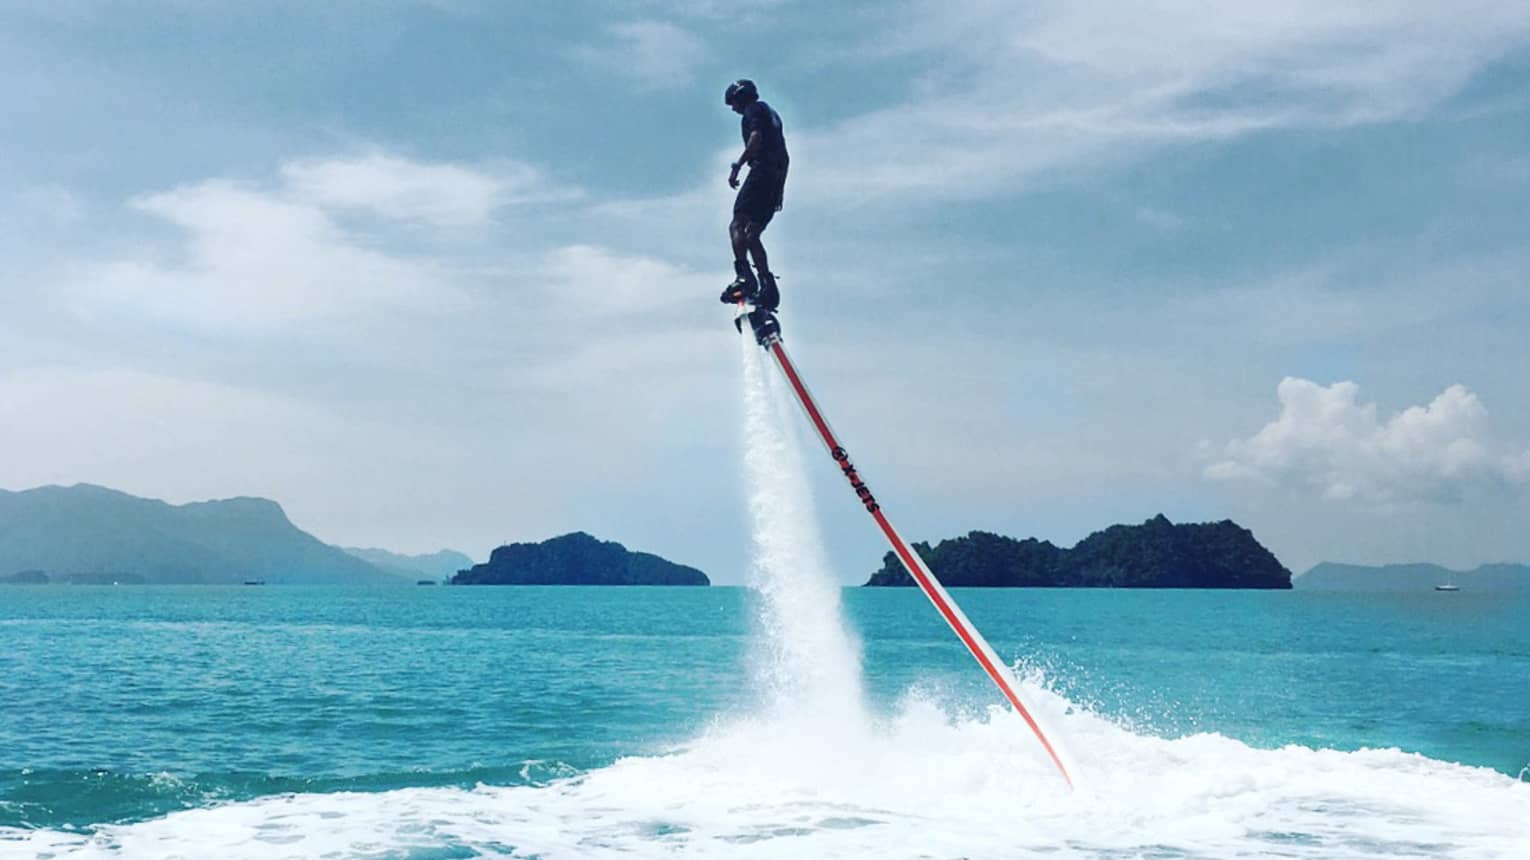 Water sprays as man soars above ocean attached to line, jet blade pack